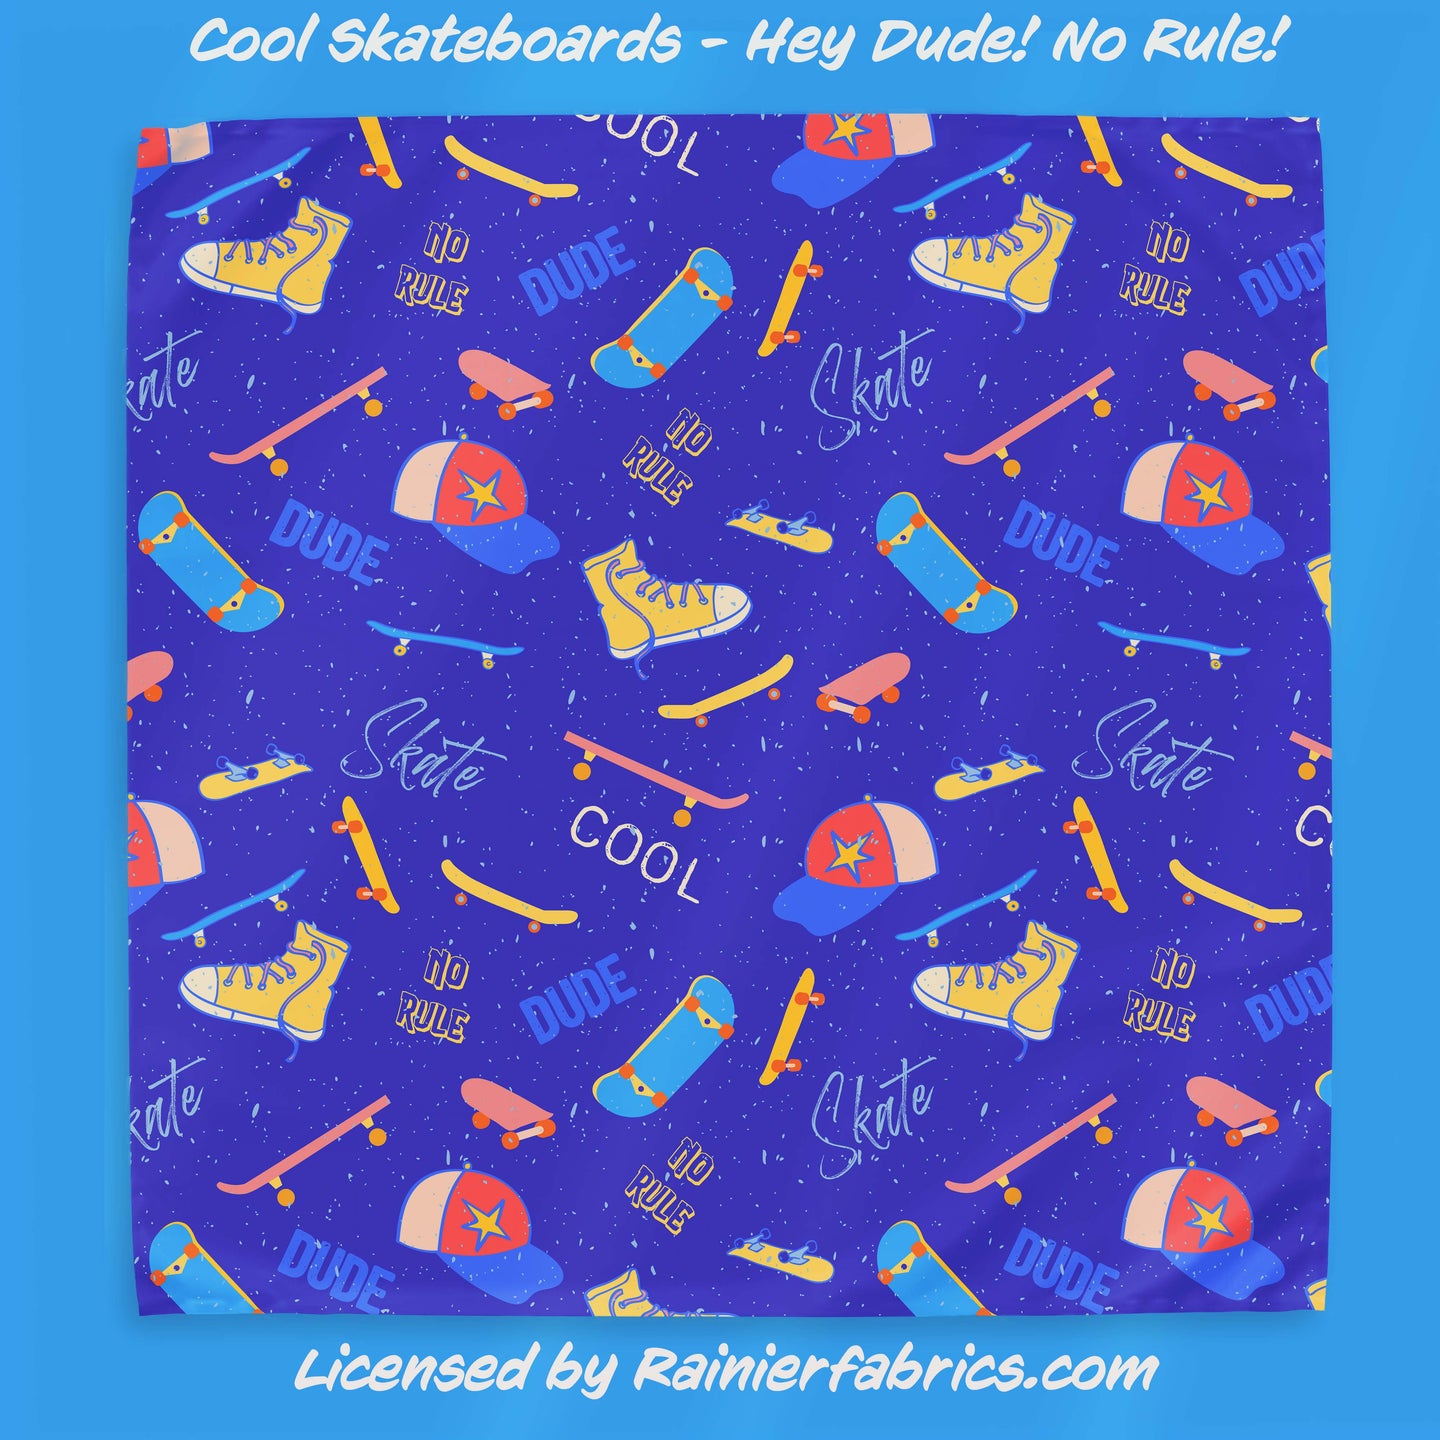 Cool Skateboards - Hey Dude - No Rule!!! - 2-5 day TAT - Order by 1/2 yard; Blankets and towels available too